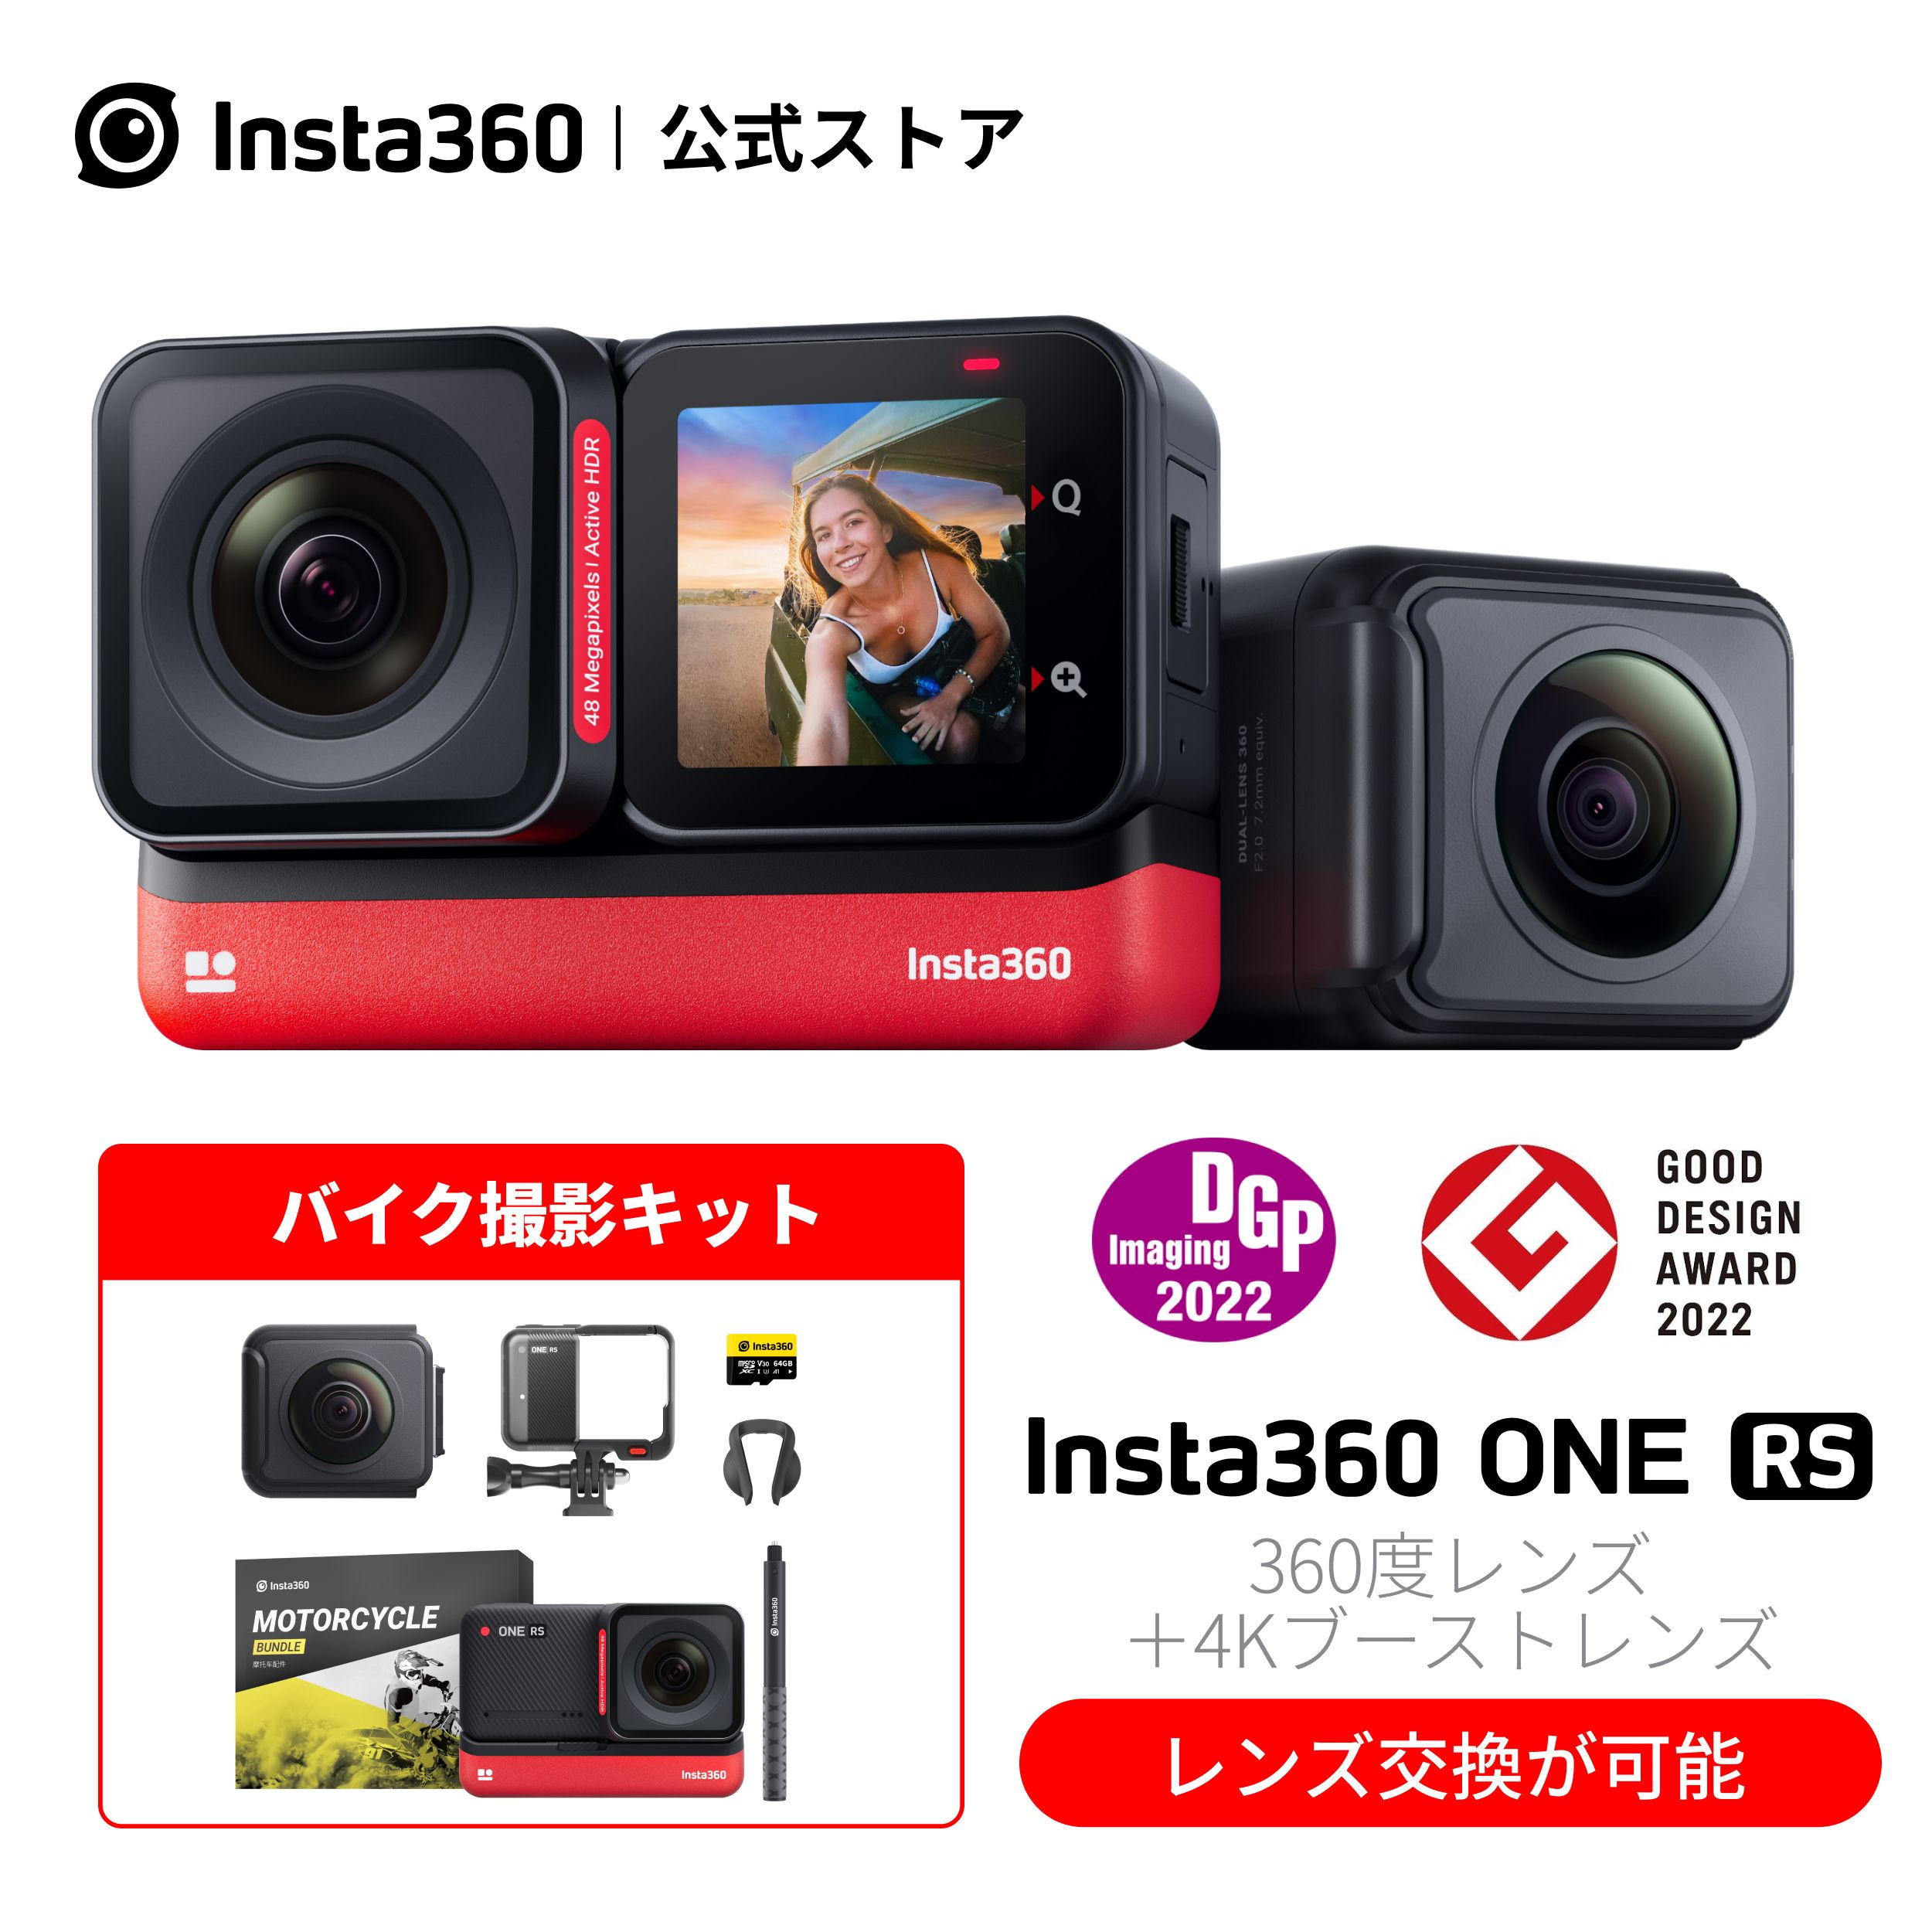 insta360 one rs ツイン バイク撮影キット-